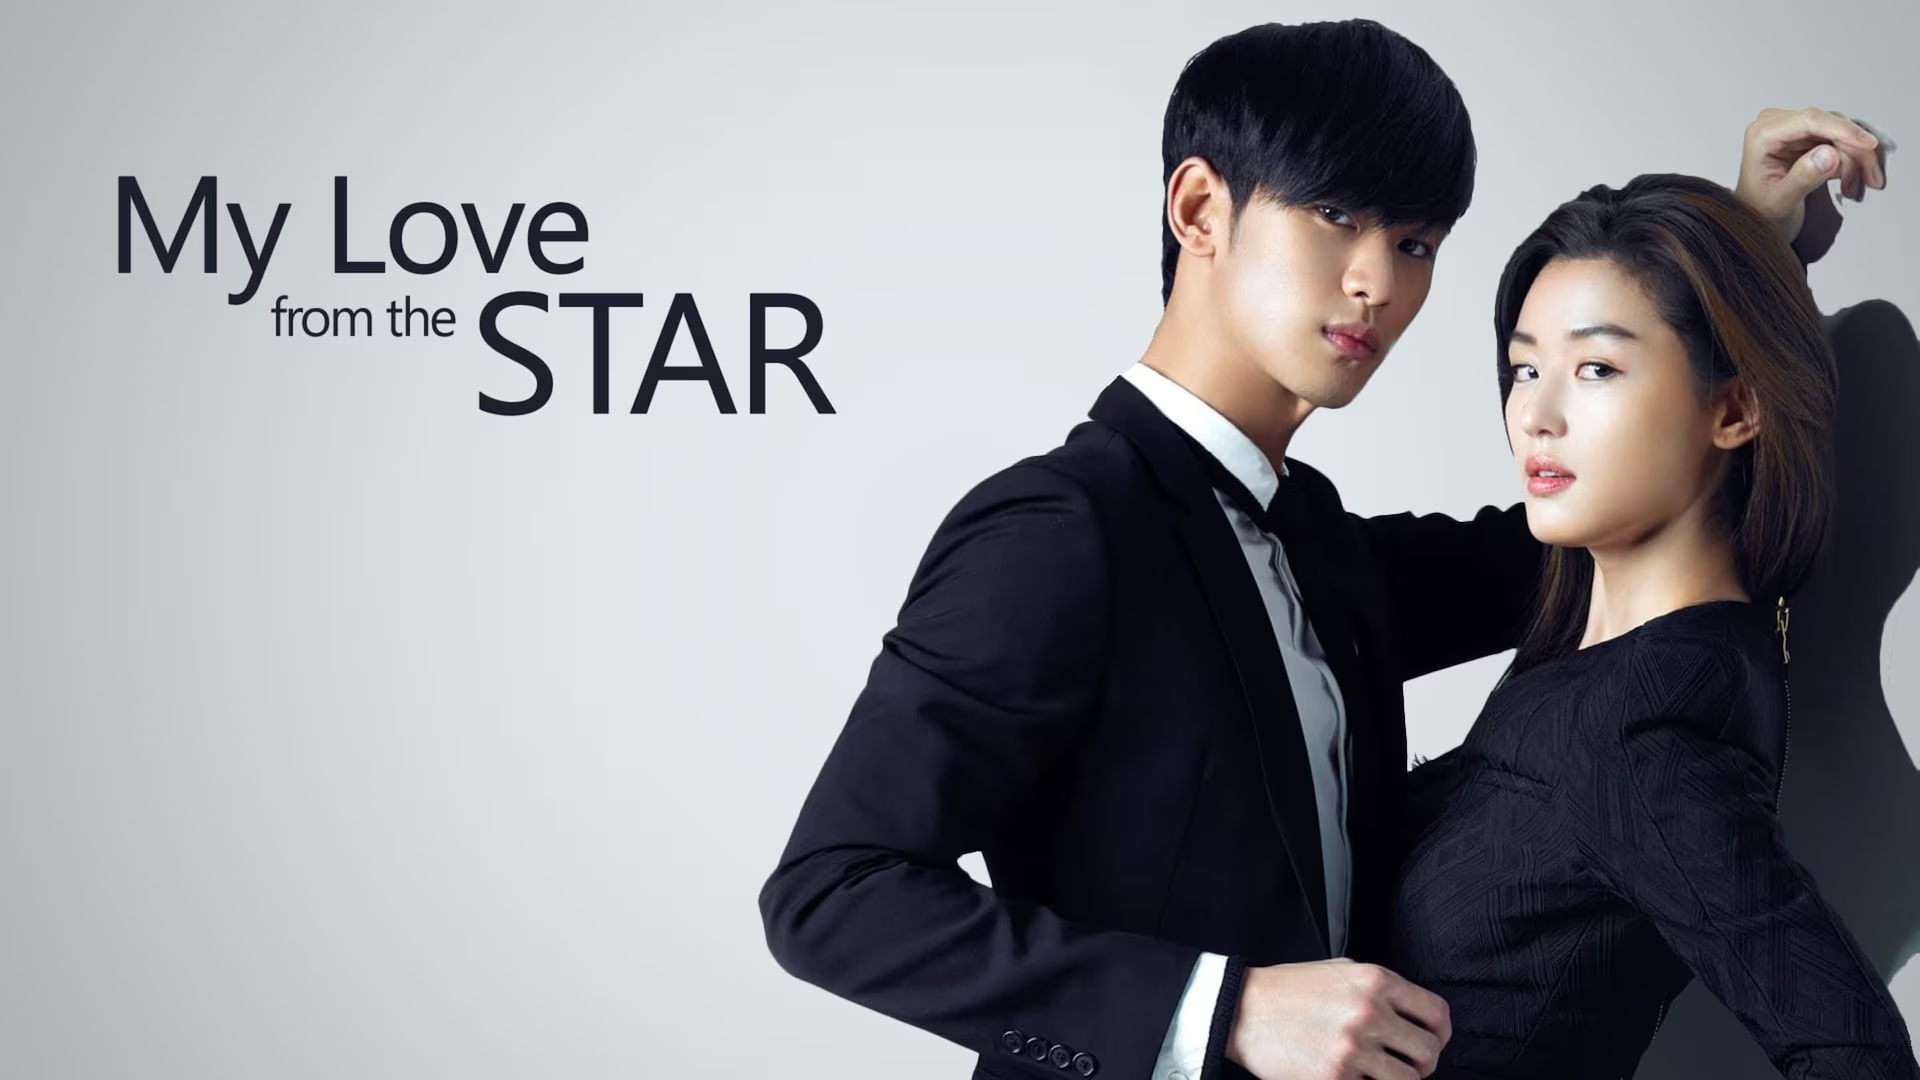 My love from the star overview